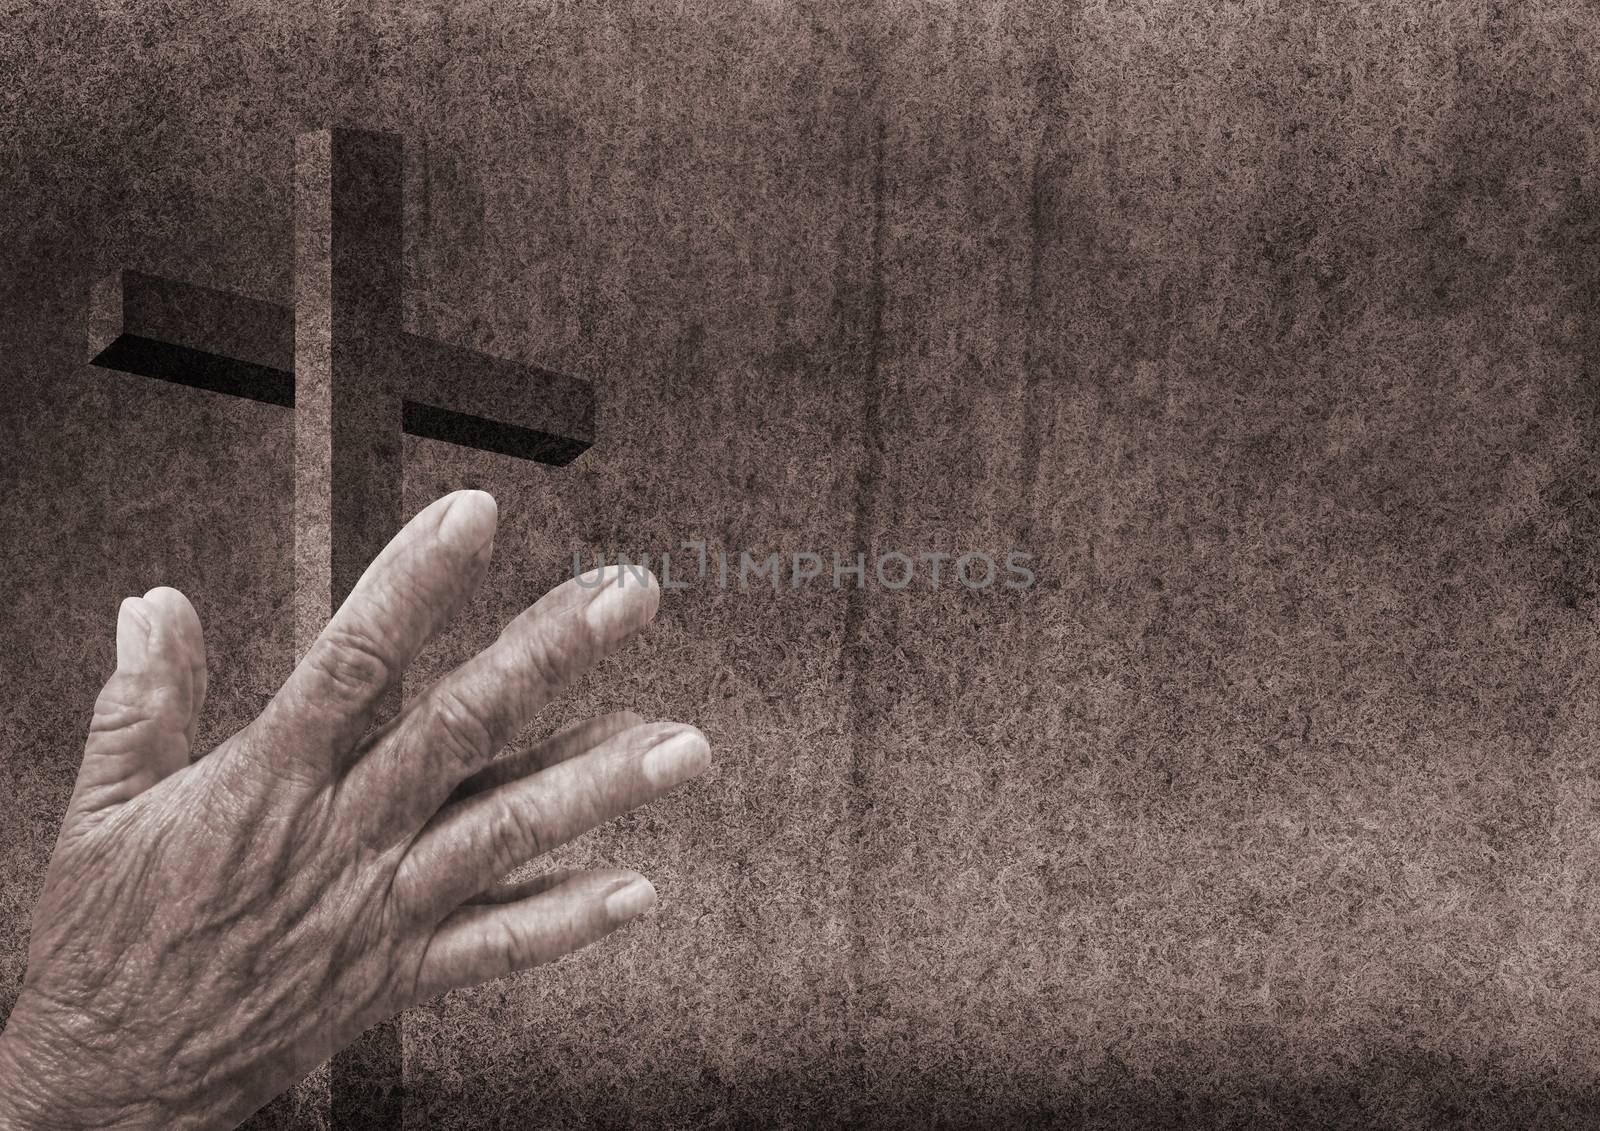 Praying hands with cross by grace21